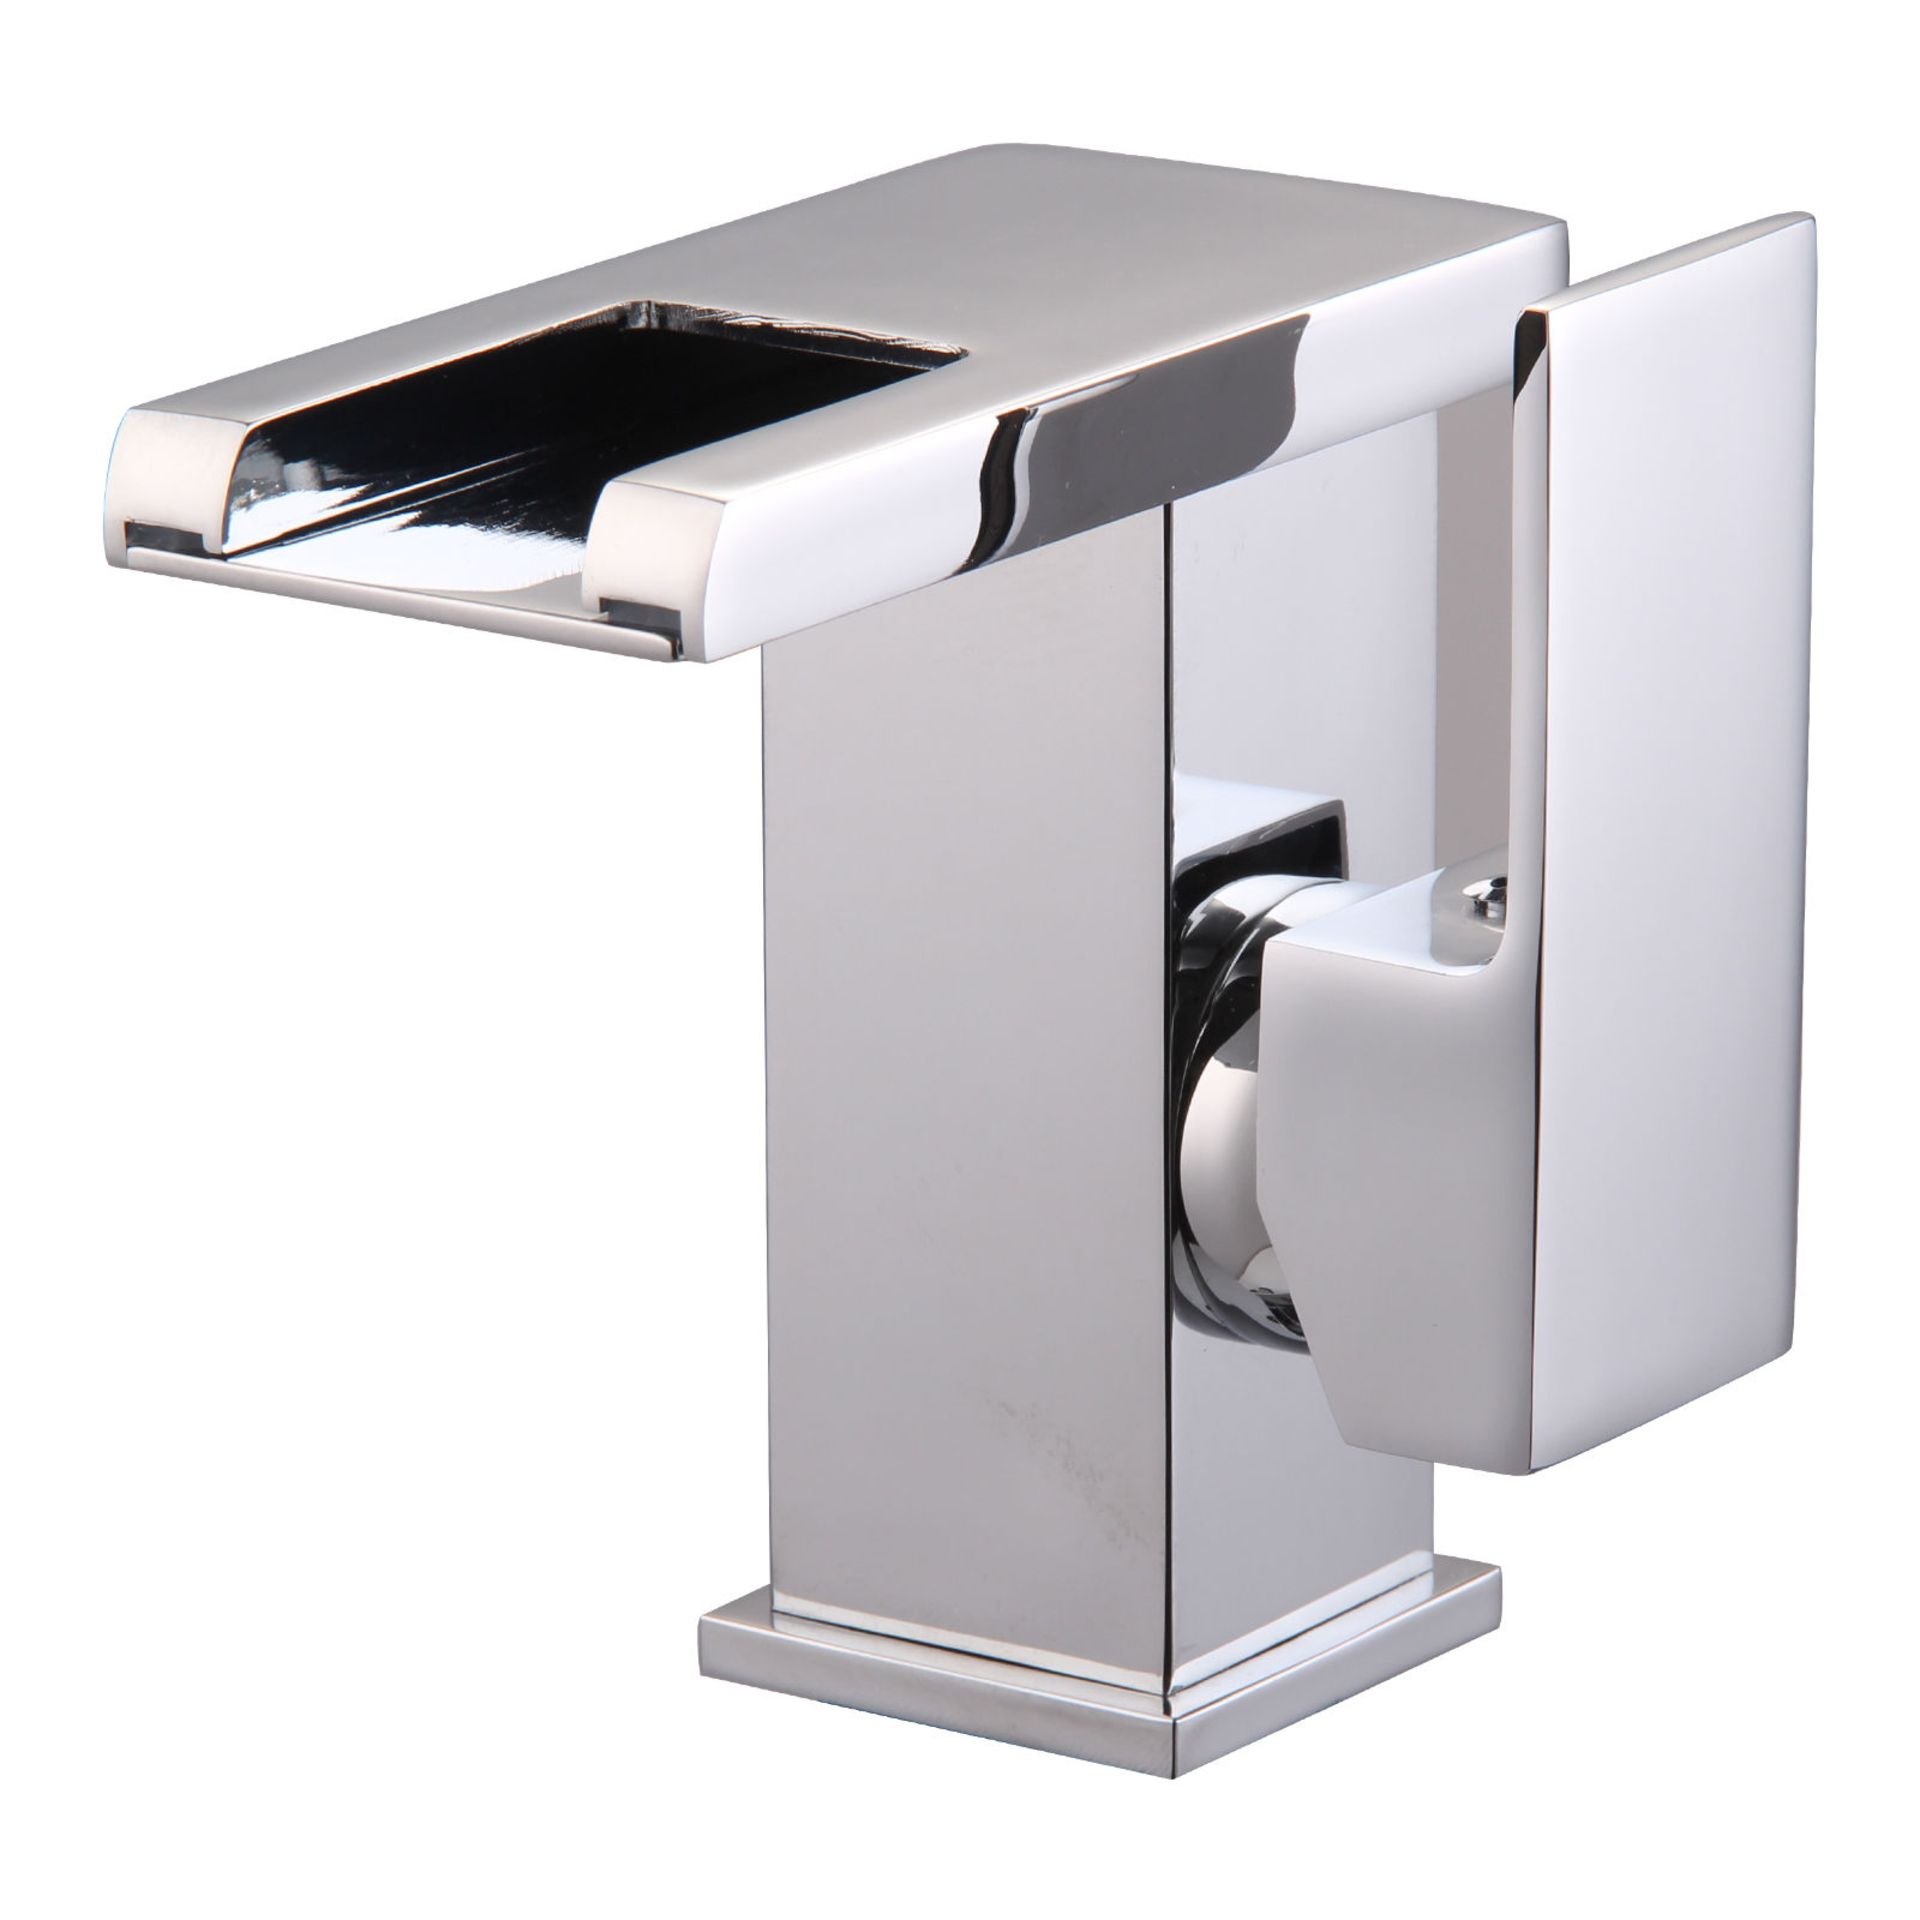 New LED Waterfall Bathroom Basin Mixer Tap. RRP £229.99. Easy To Install And Clean. All Coppe - Image 2 of 2